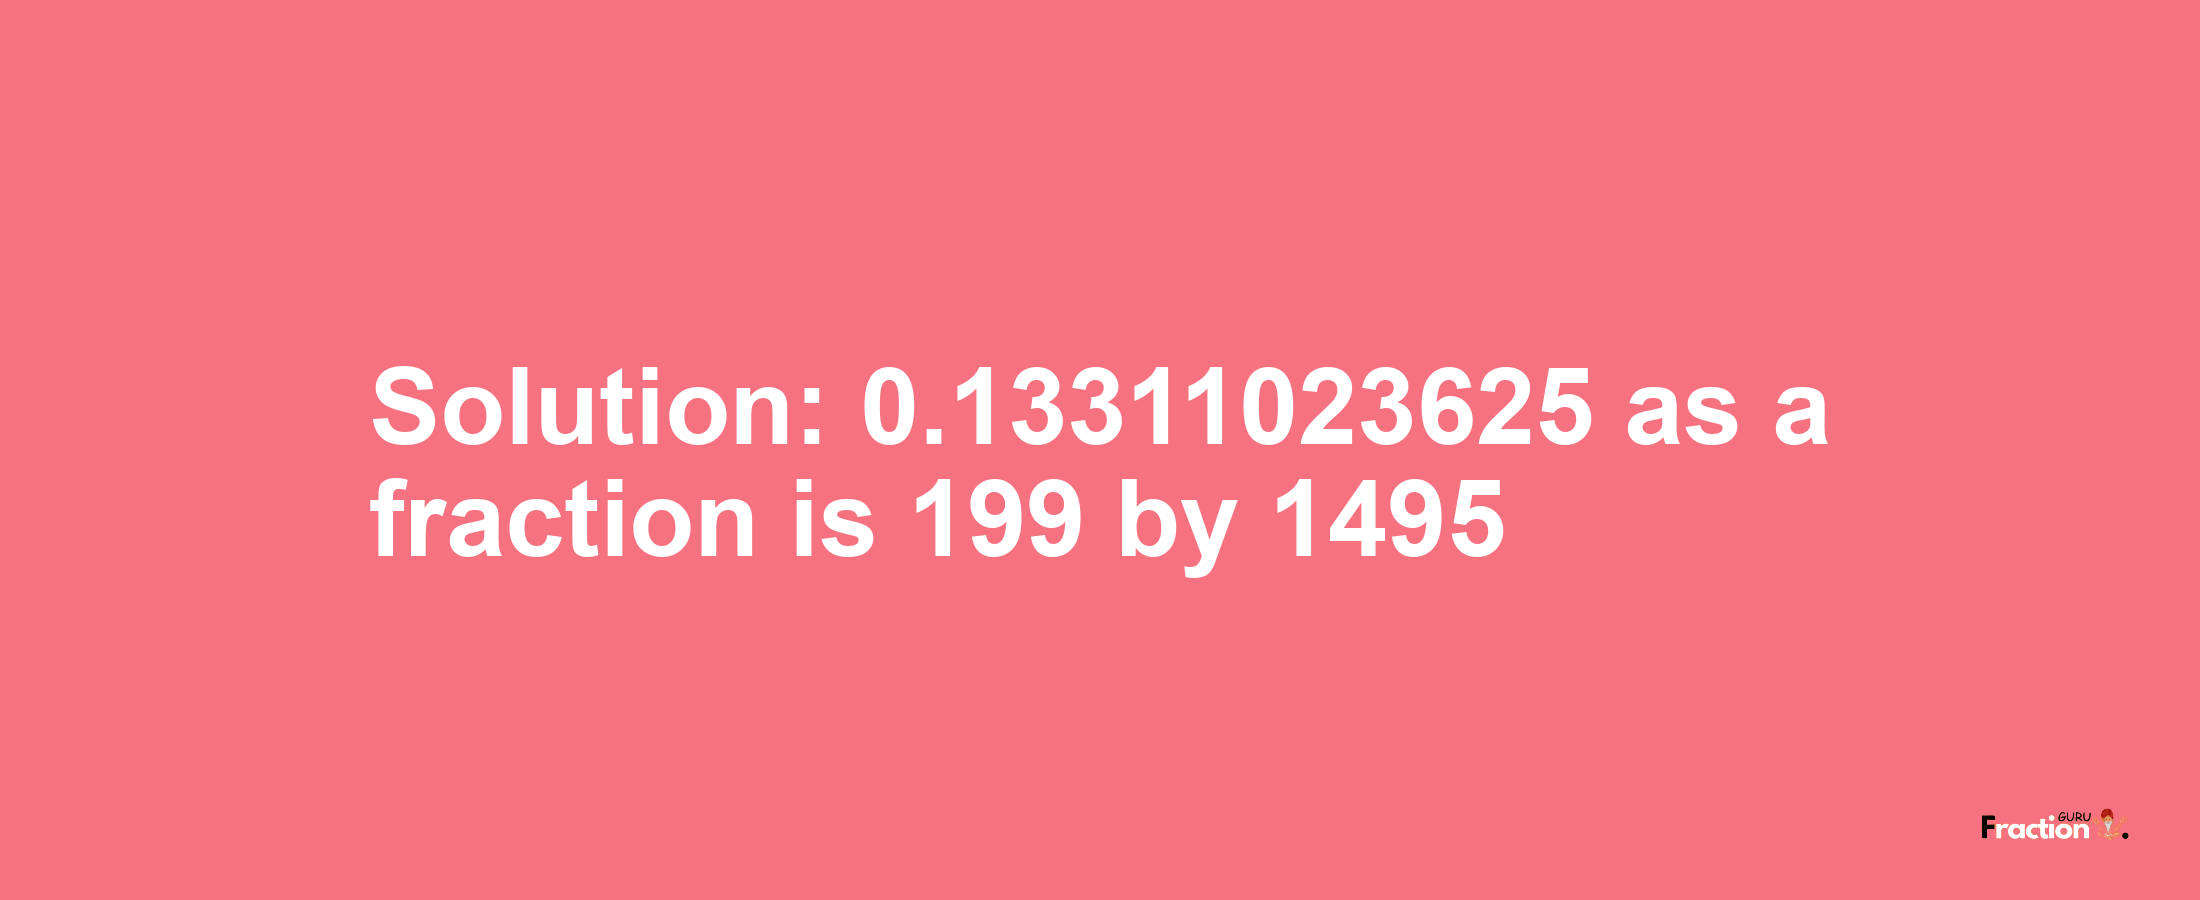 Solution:0.13311023625 as a fraction is 199/1495